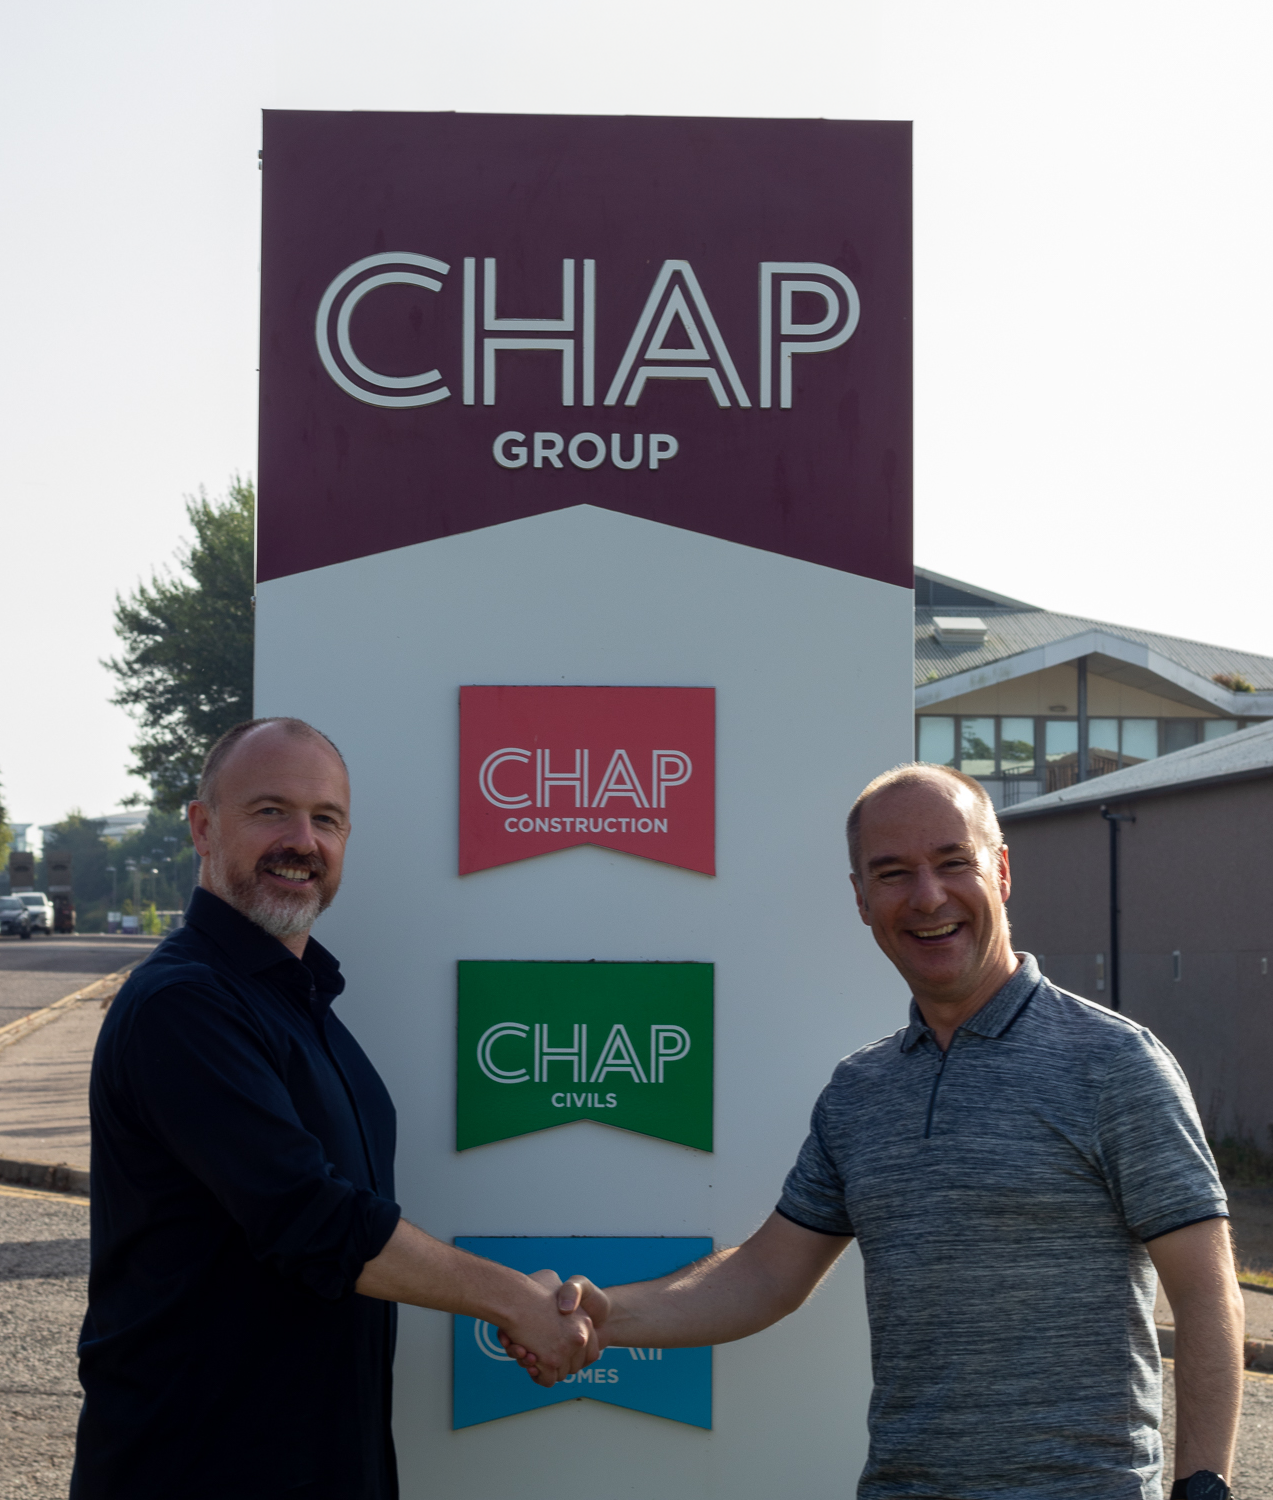 CHAP Group welcomes John Scott as new design manager